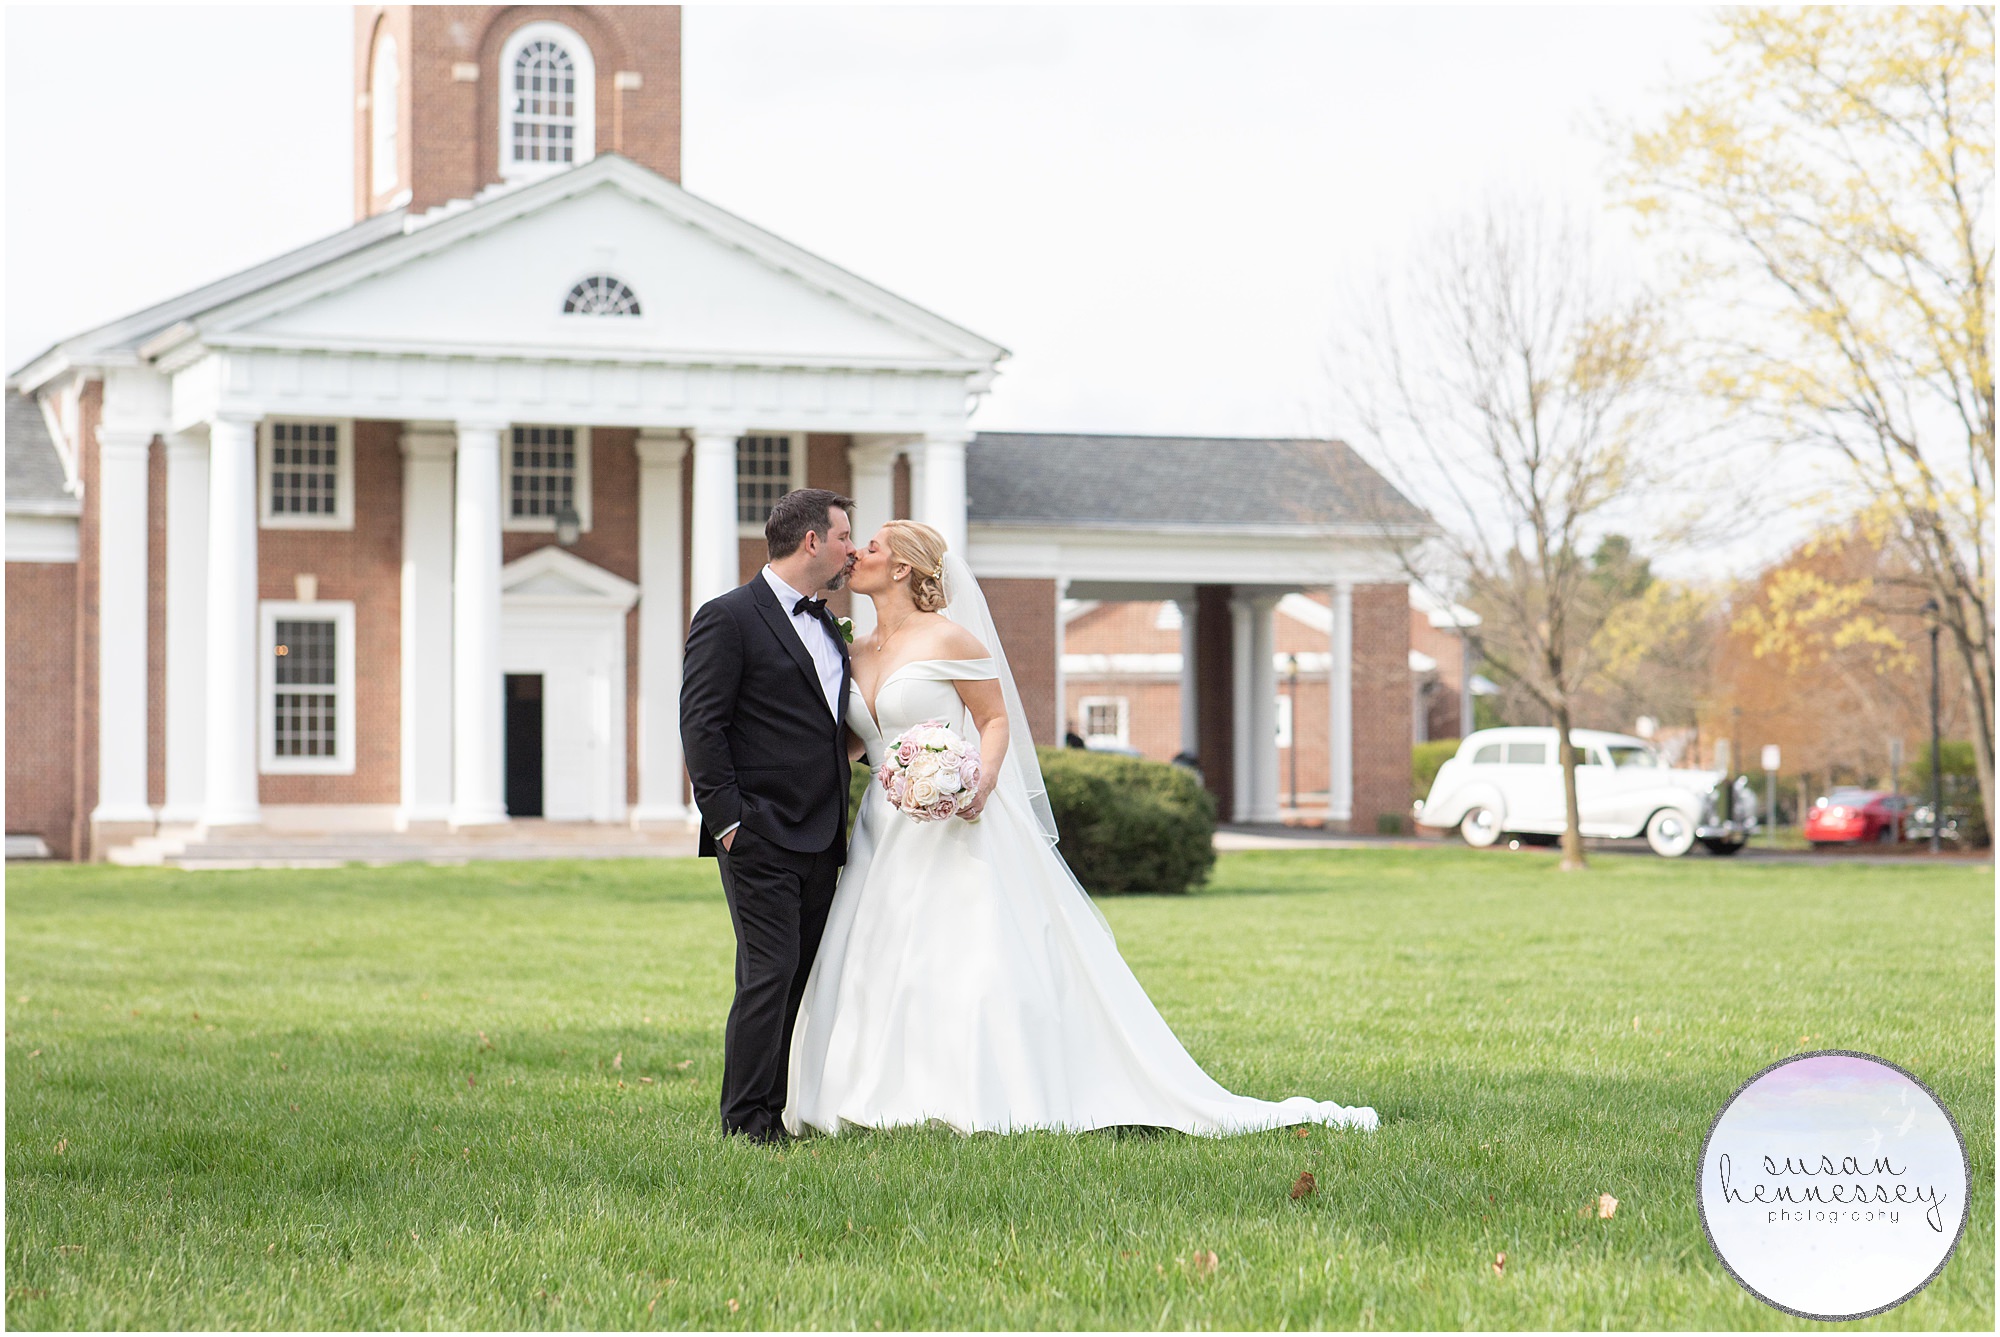 Planning a Micro Wedding? The First Presbyterian Church of Moorestown is a stunning backdrop to say "I do"